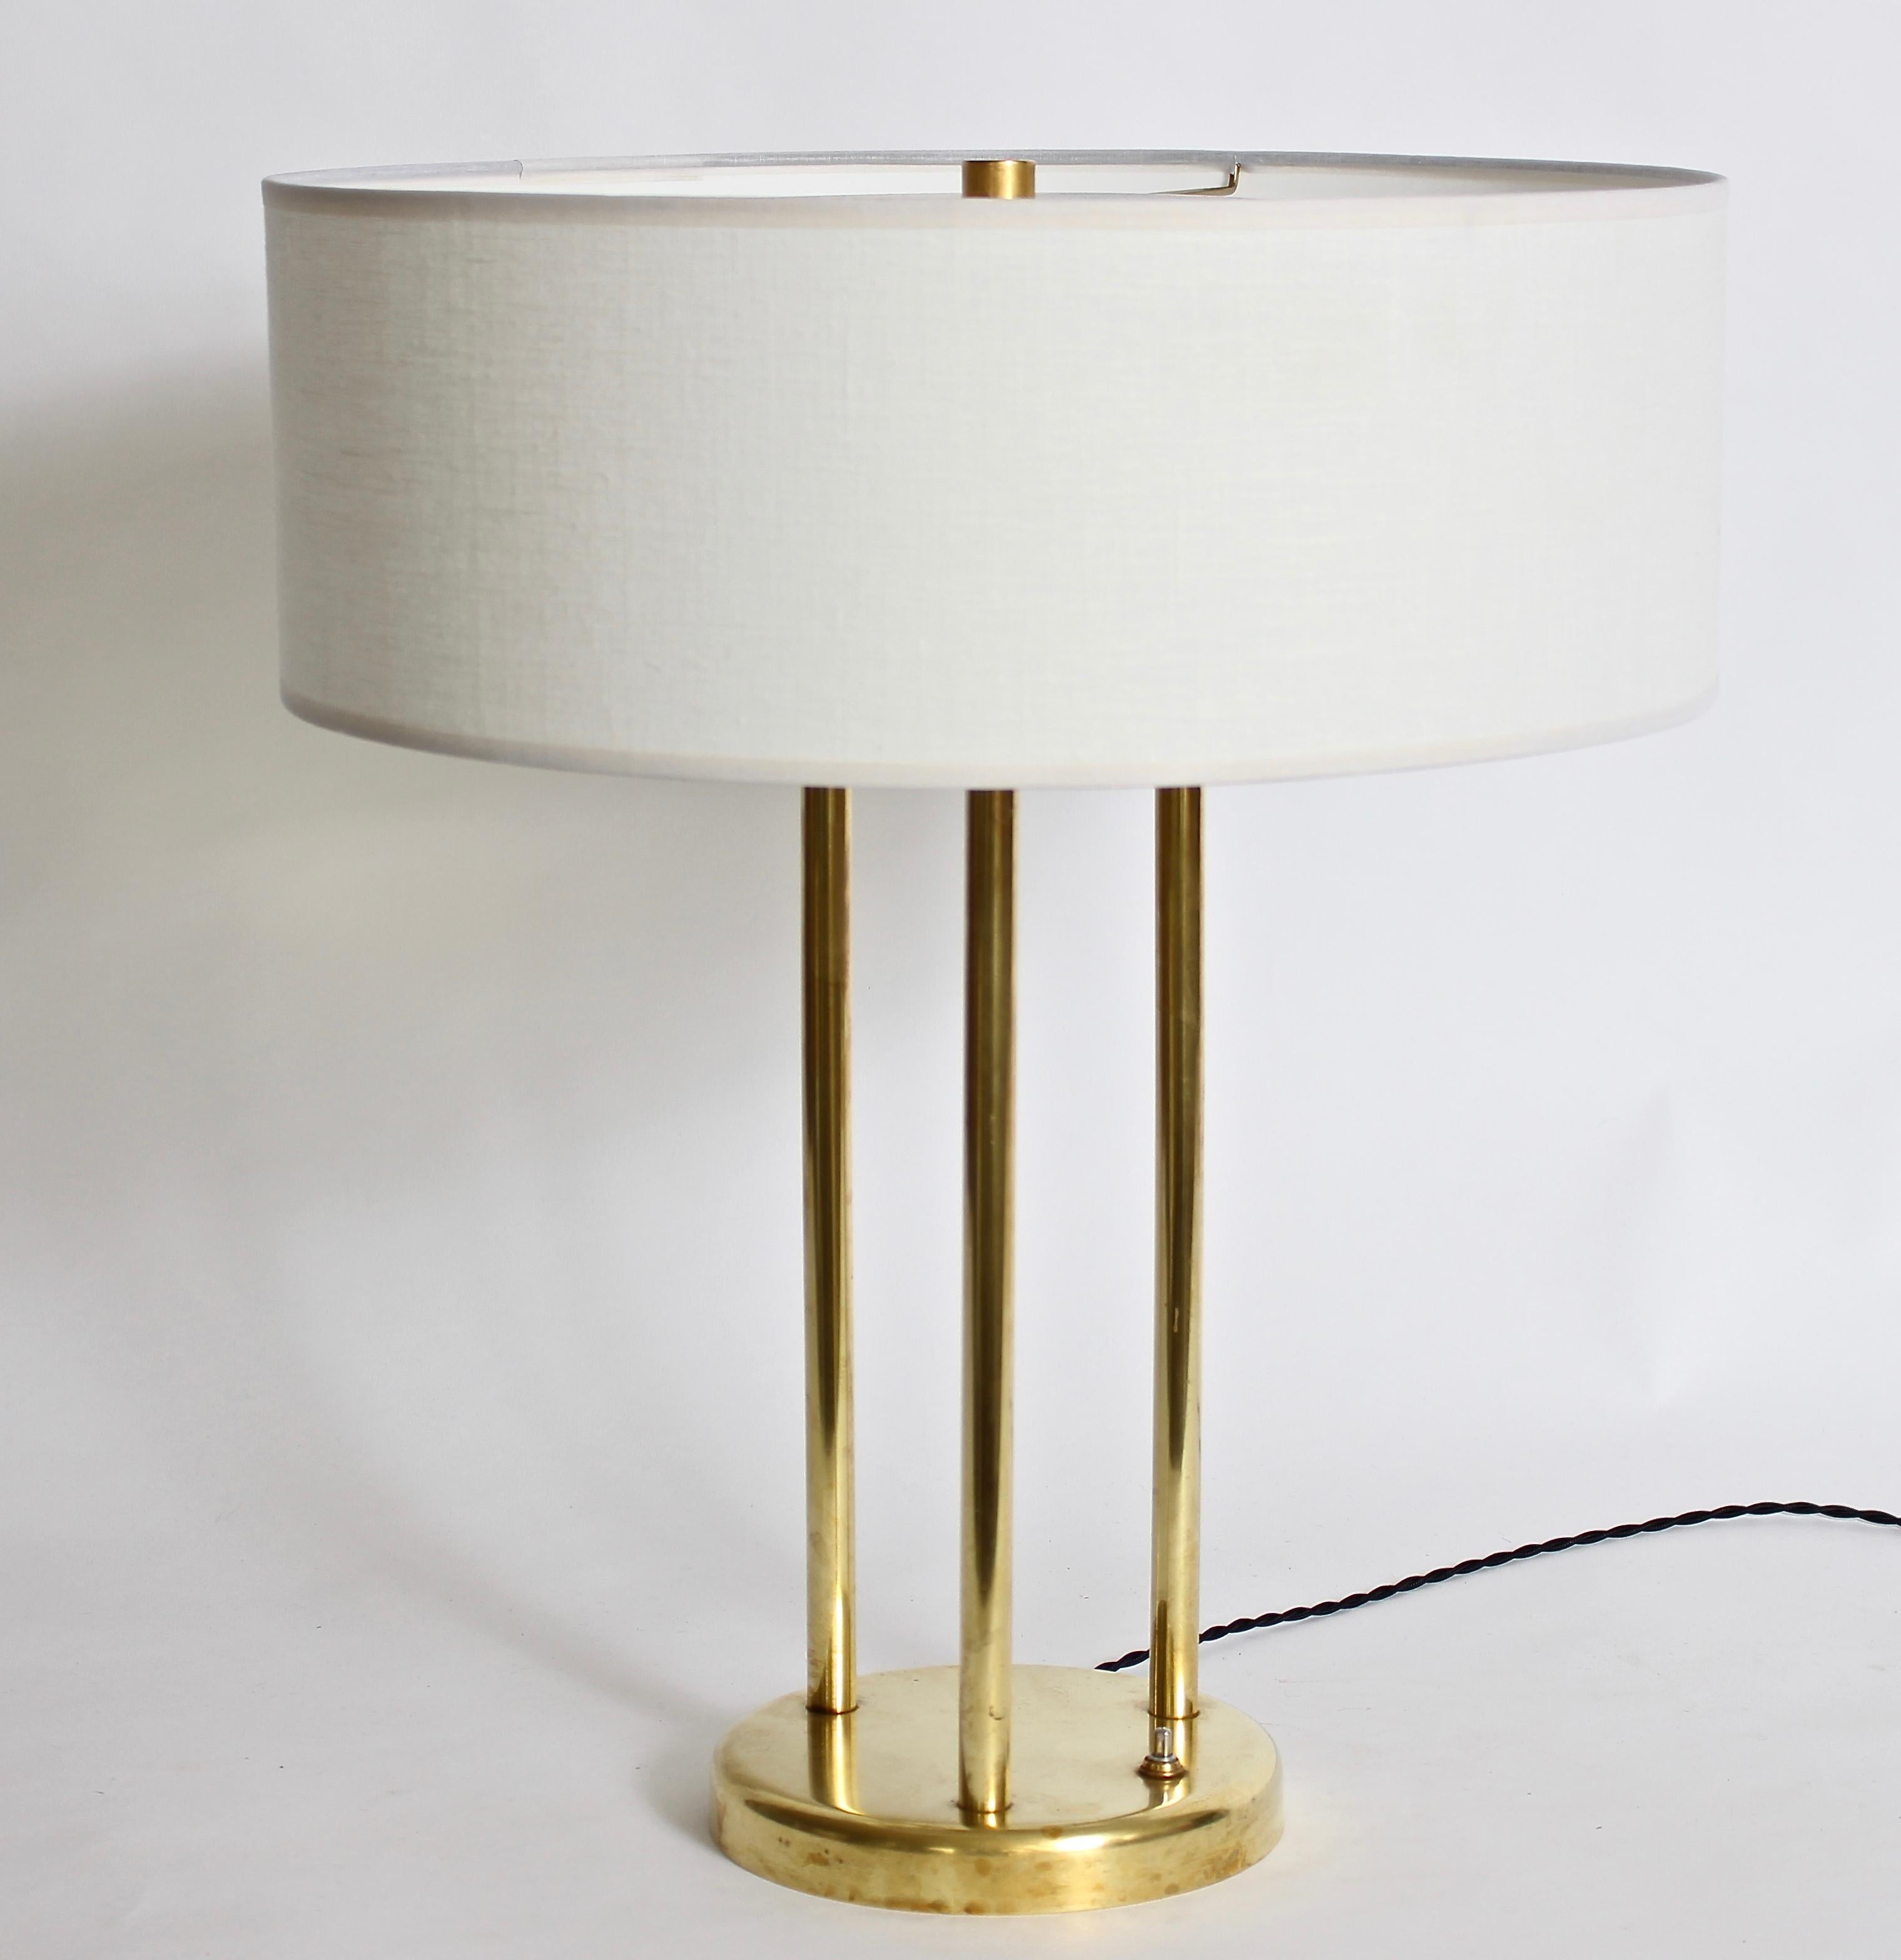 Stewart Ross James for Hansen Lamp Company reflective all brass table lamp. Featuring an all Brass tri column framework and circular base.  With original top disc reflector and finial. Triple sockets. Shade shown for display only (6H x 17D). 16H to